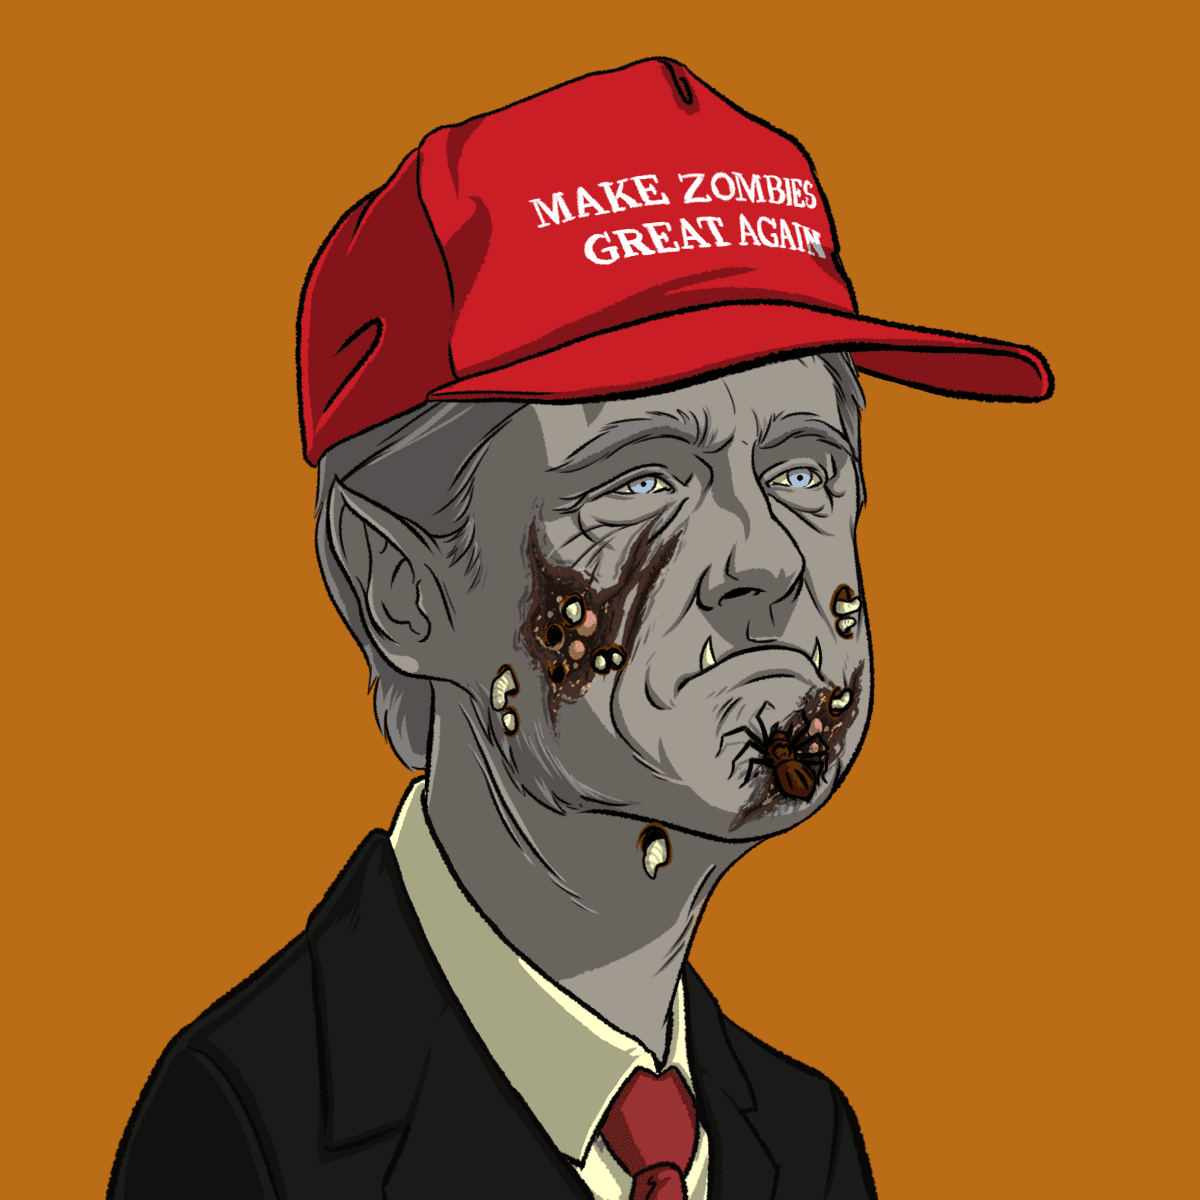 Undead Presidents #105